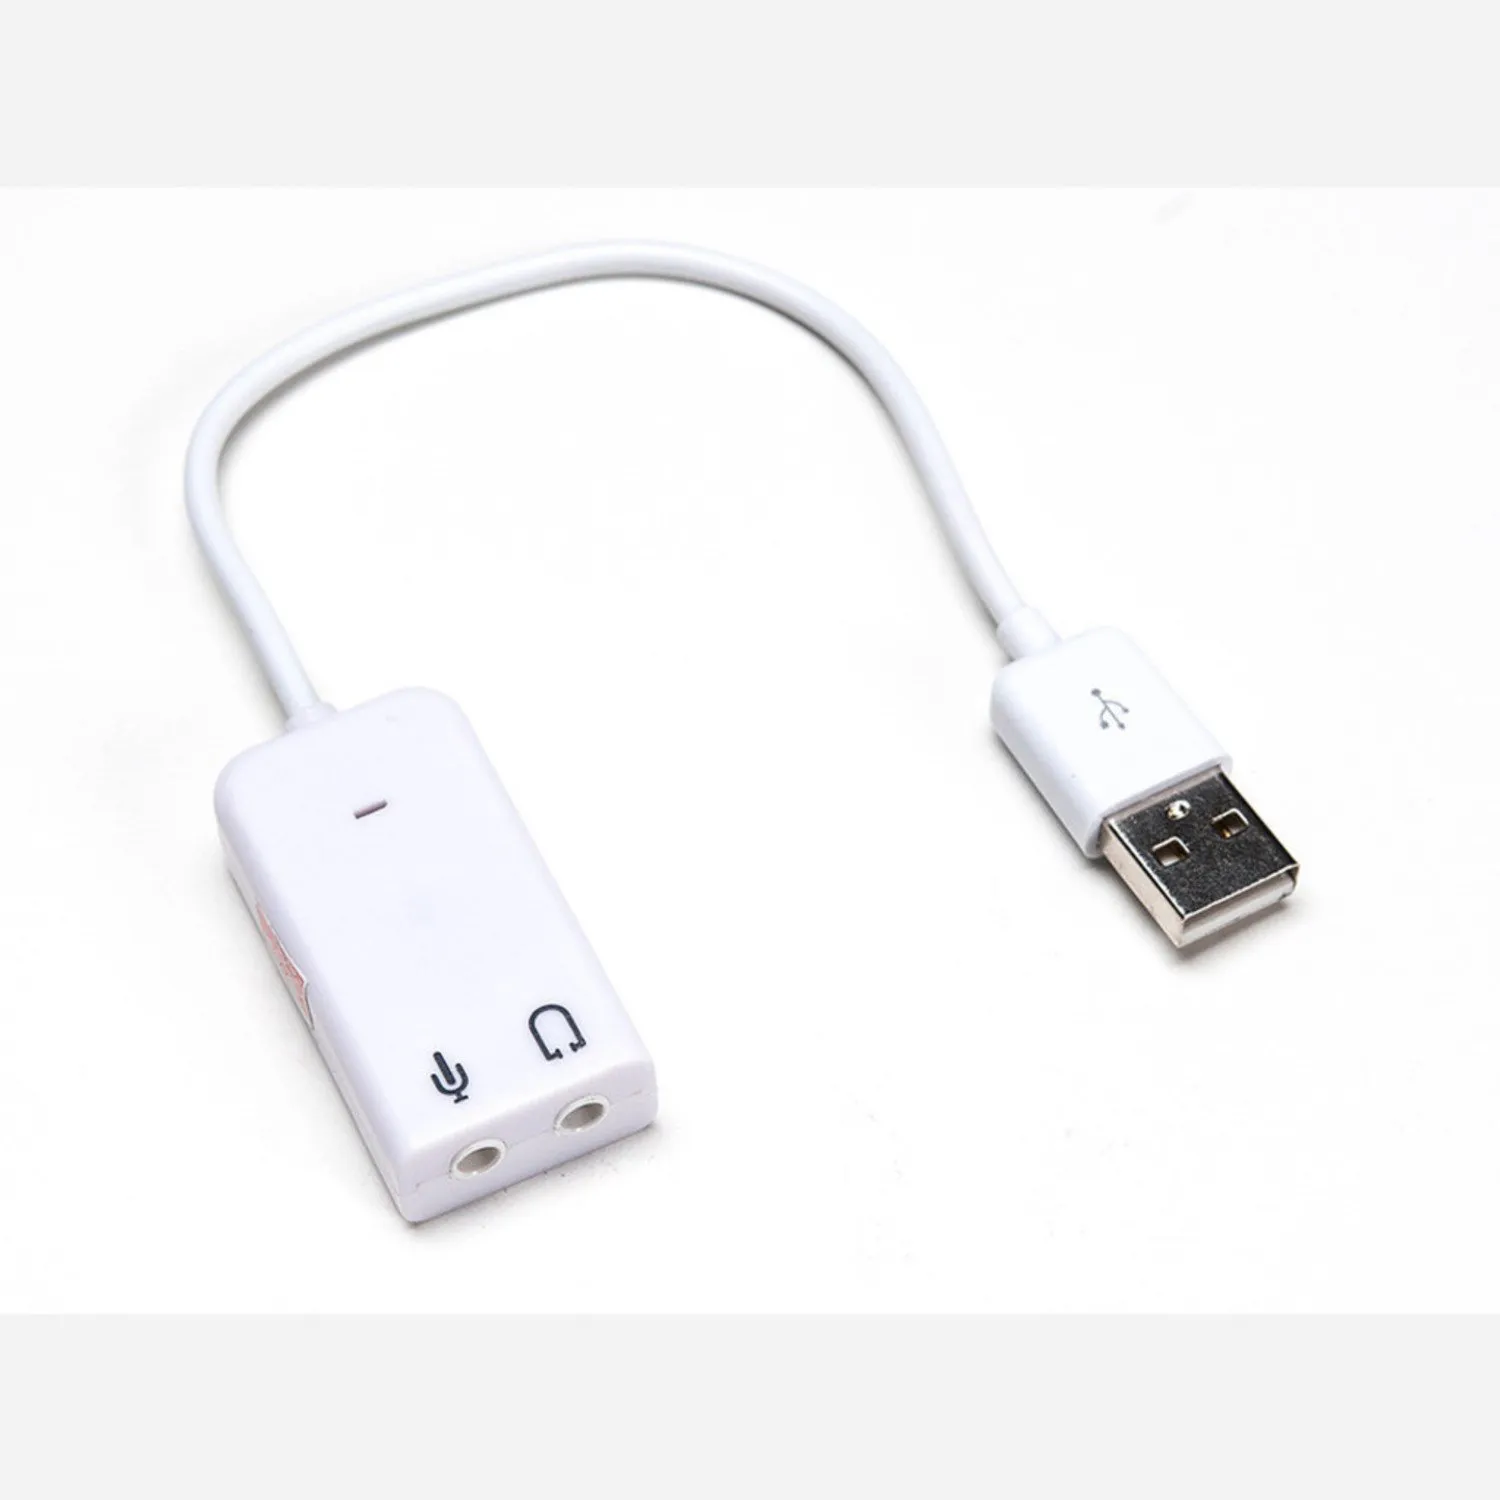 Photo of USB Audio Adapter - Works with Raspberry Pi